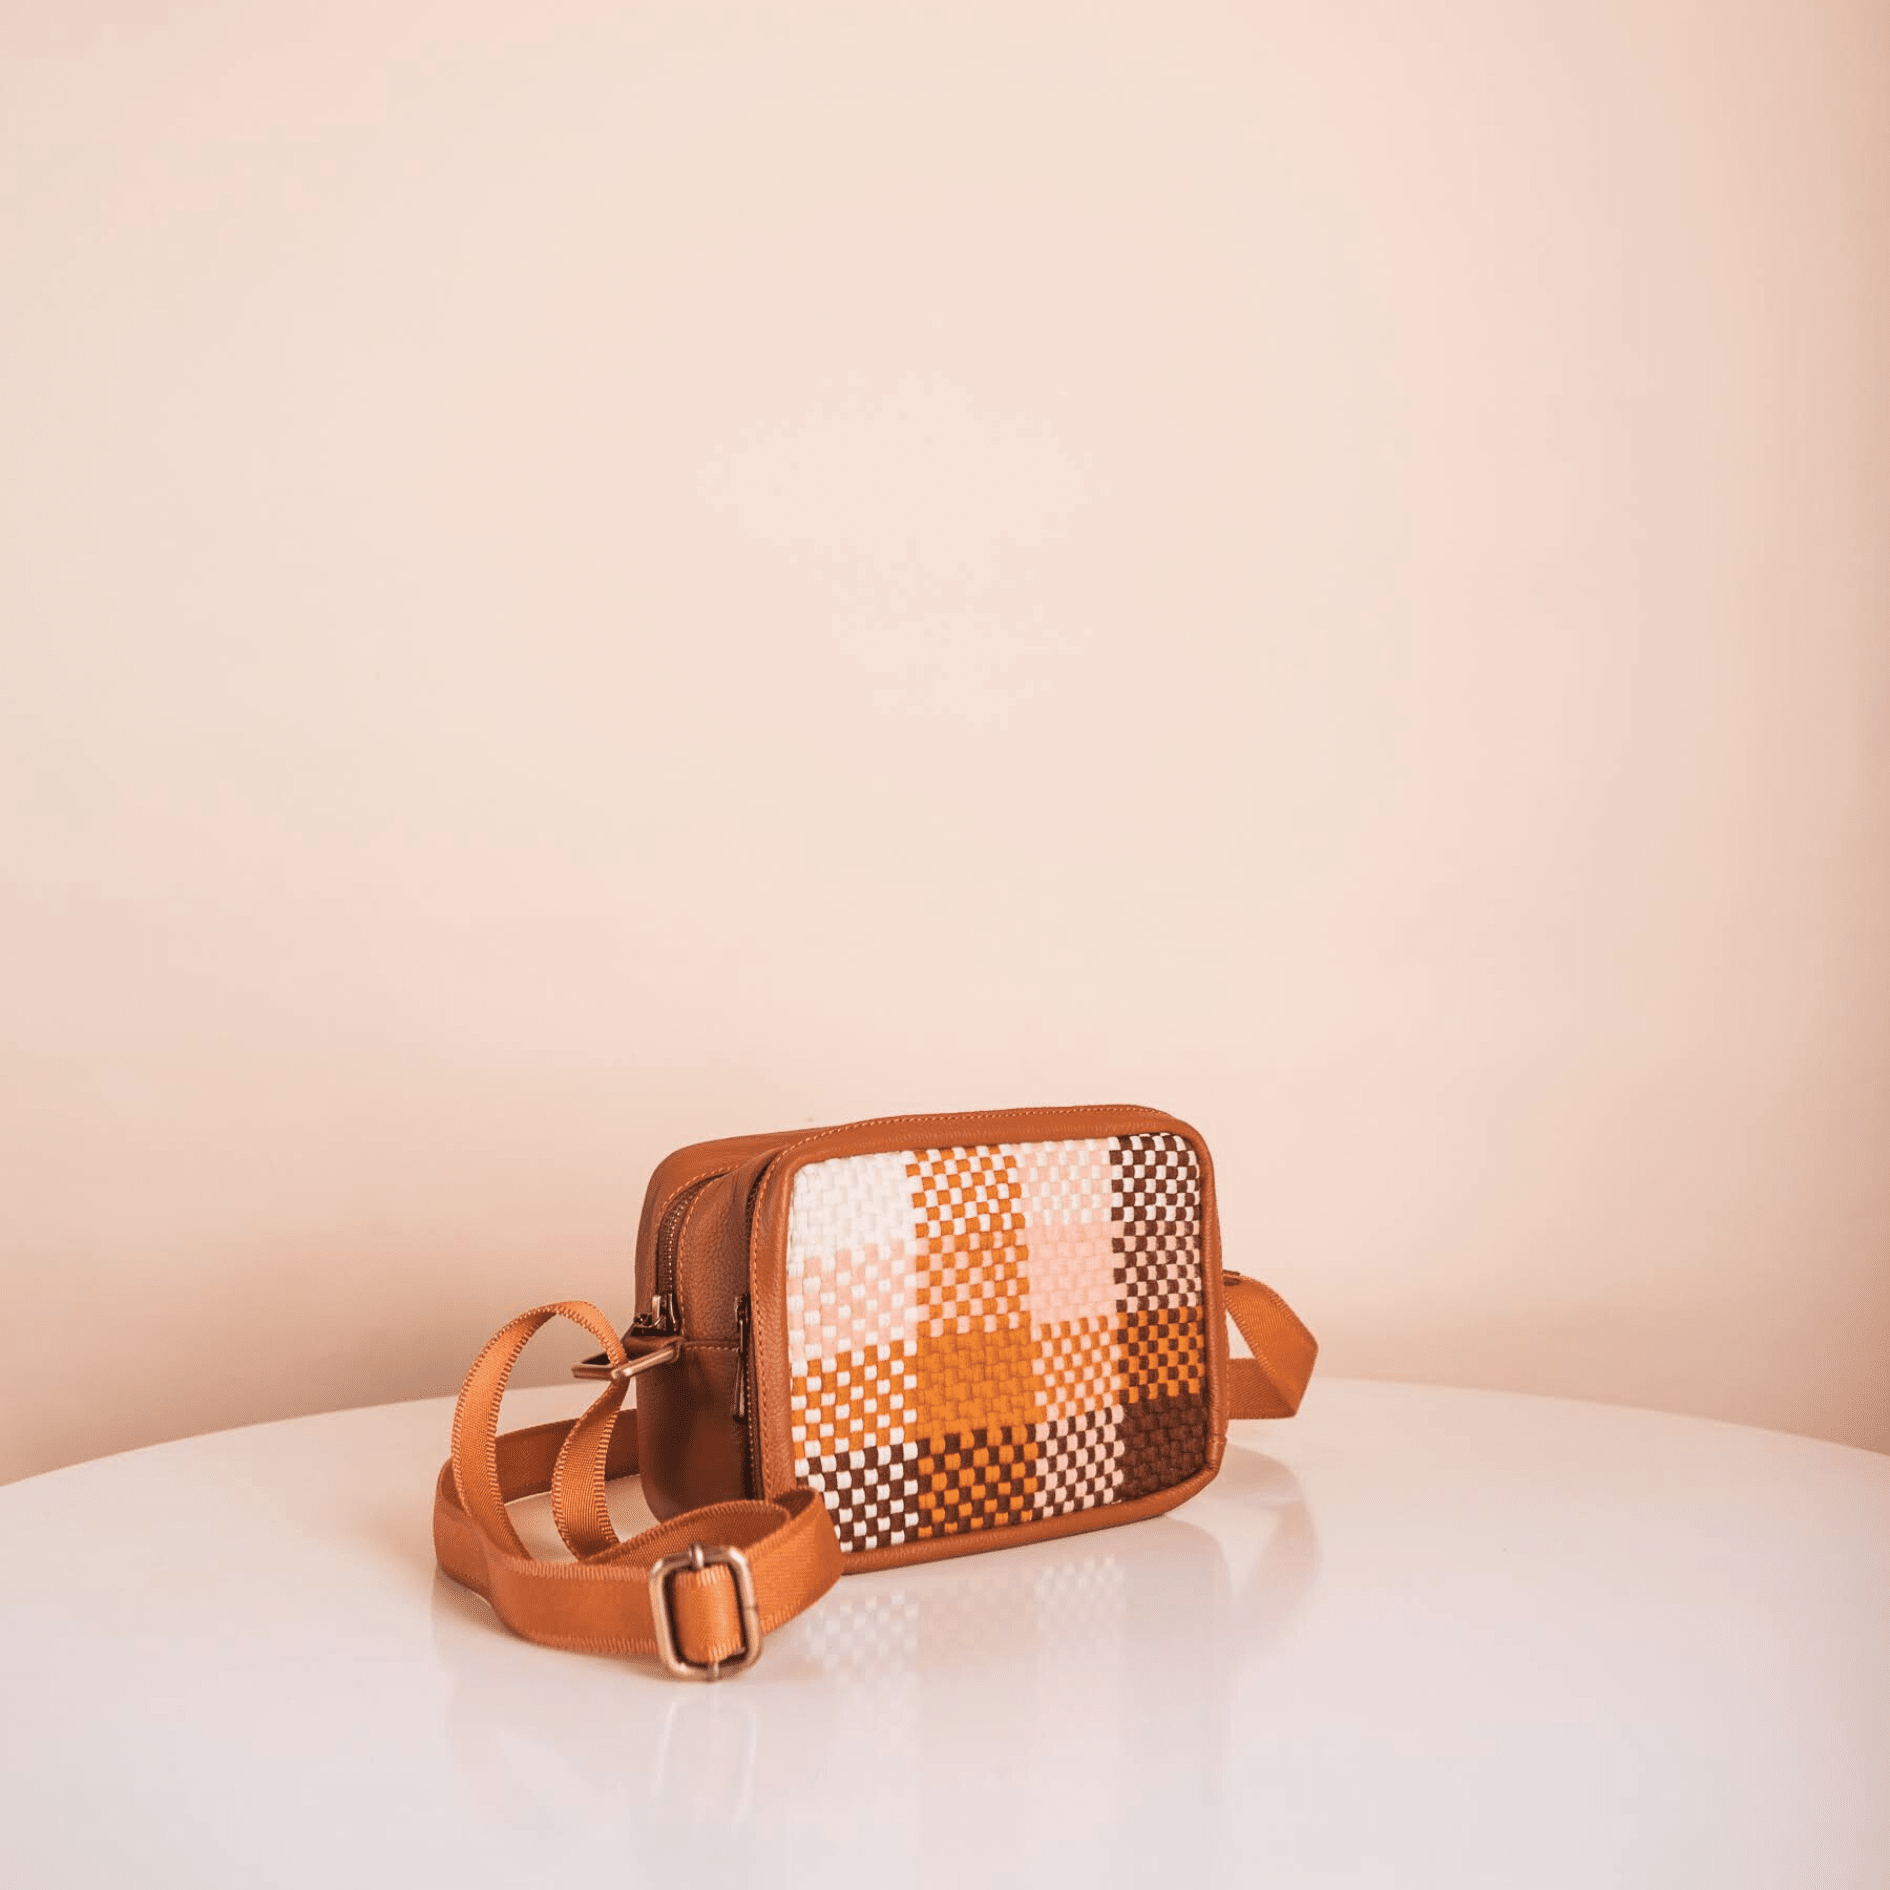 The Platinum Travel Everything-I-Need Sling in Tan R2R